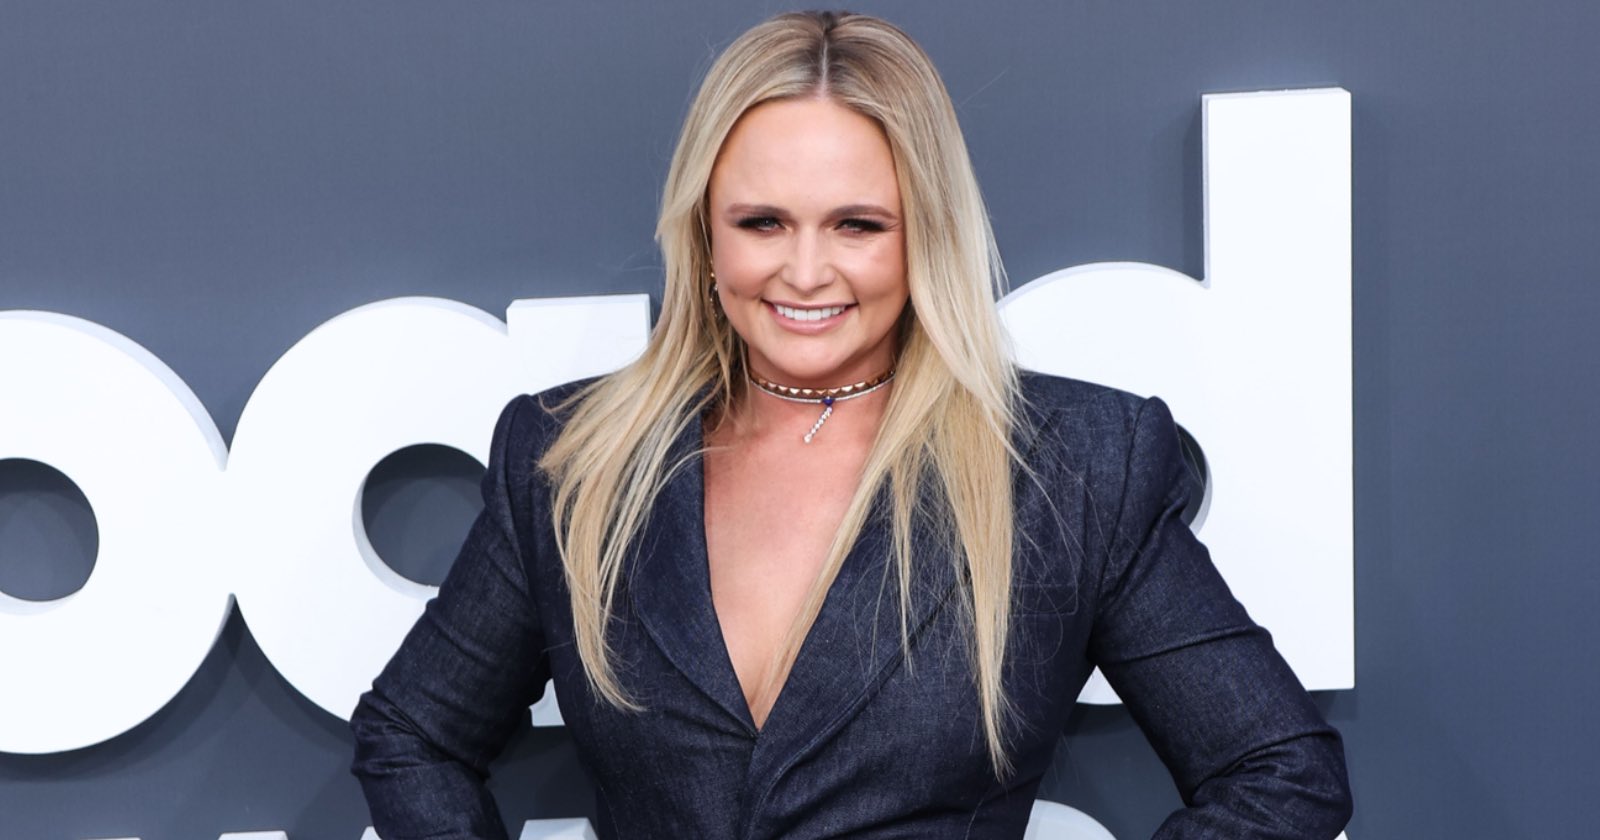 Miranda Lambert Sparks Debate After Stopping Concert to Call Out Selfie